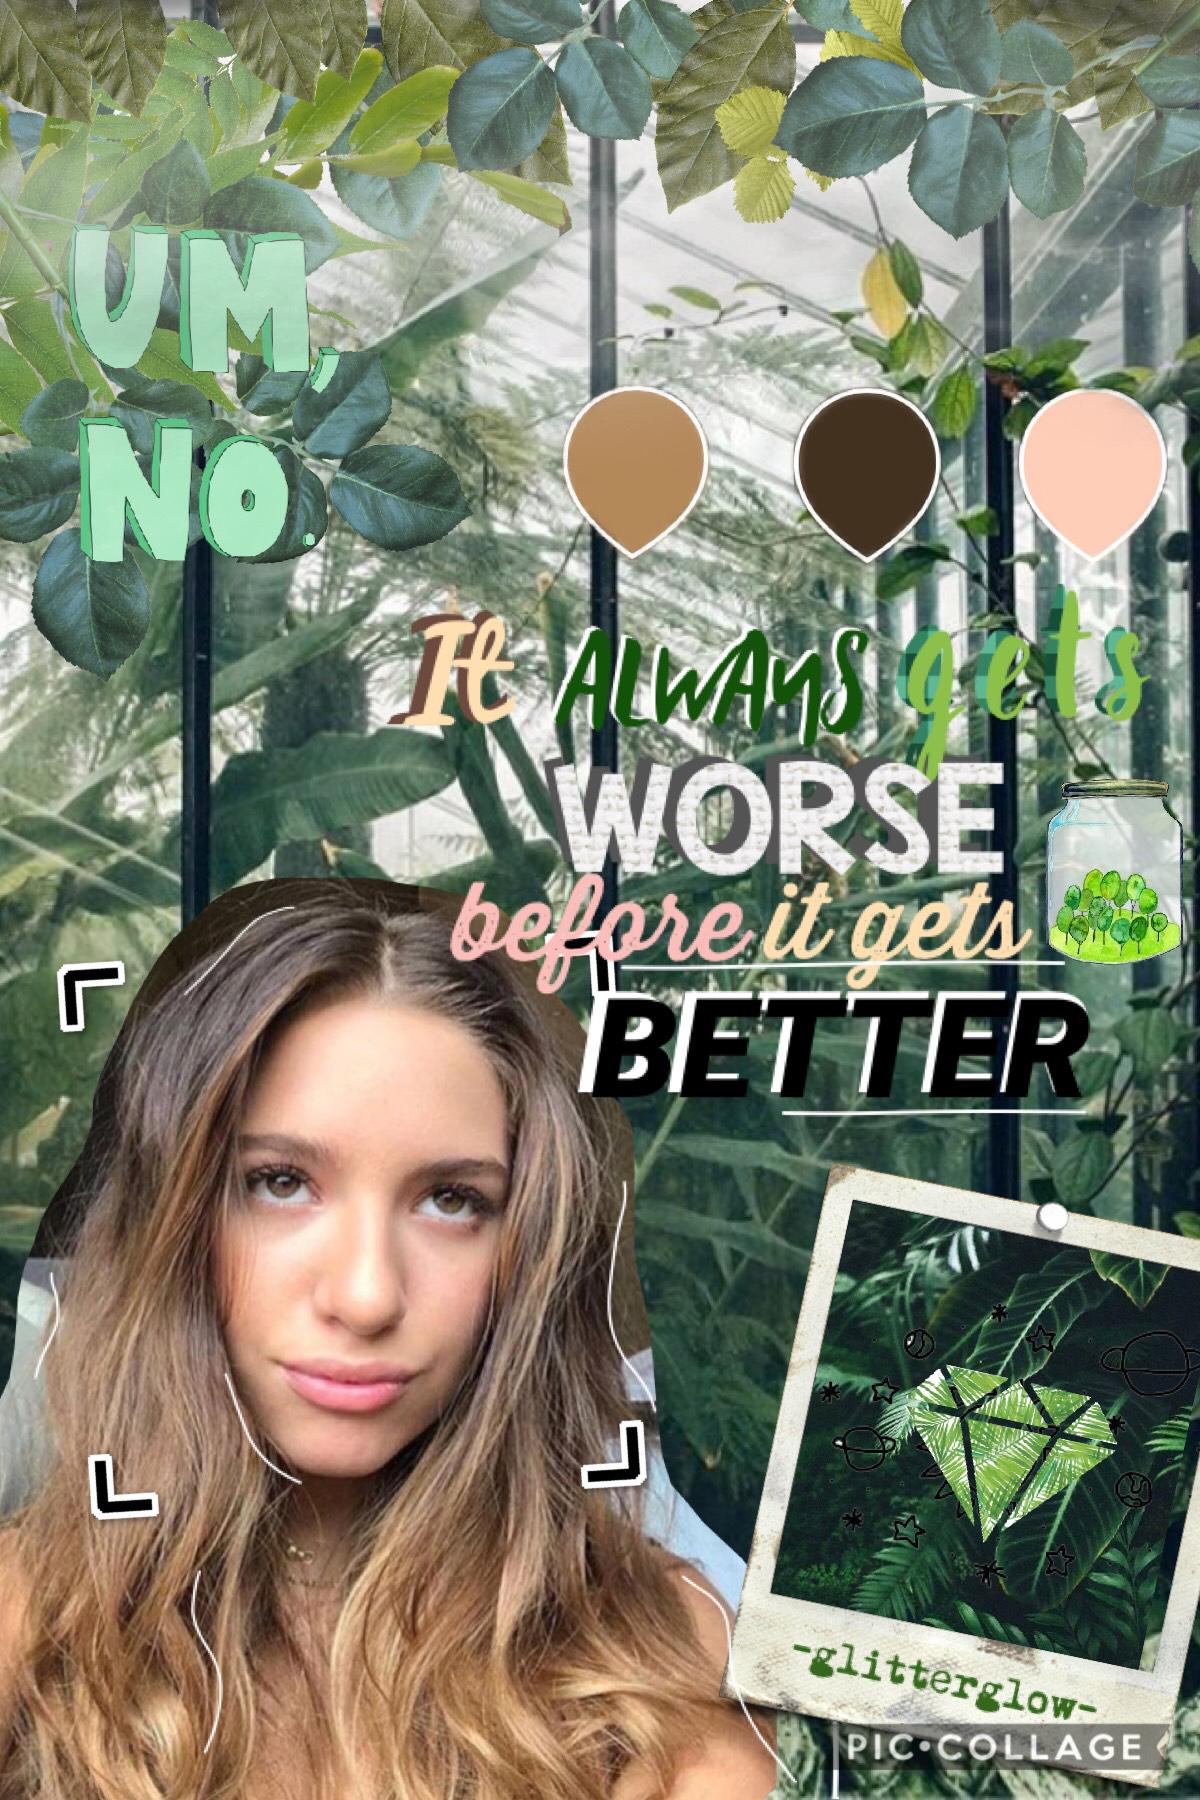 🌿tap!🌿 this collage took quite a while, but I’m happy with the end result! hope u guys like this! 💚